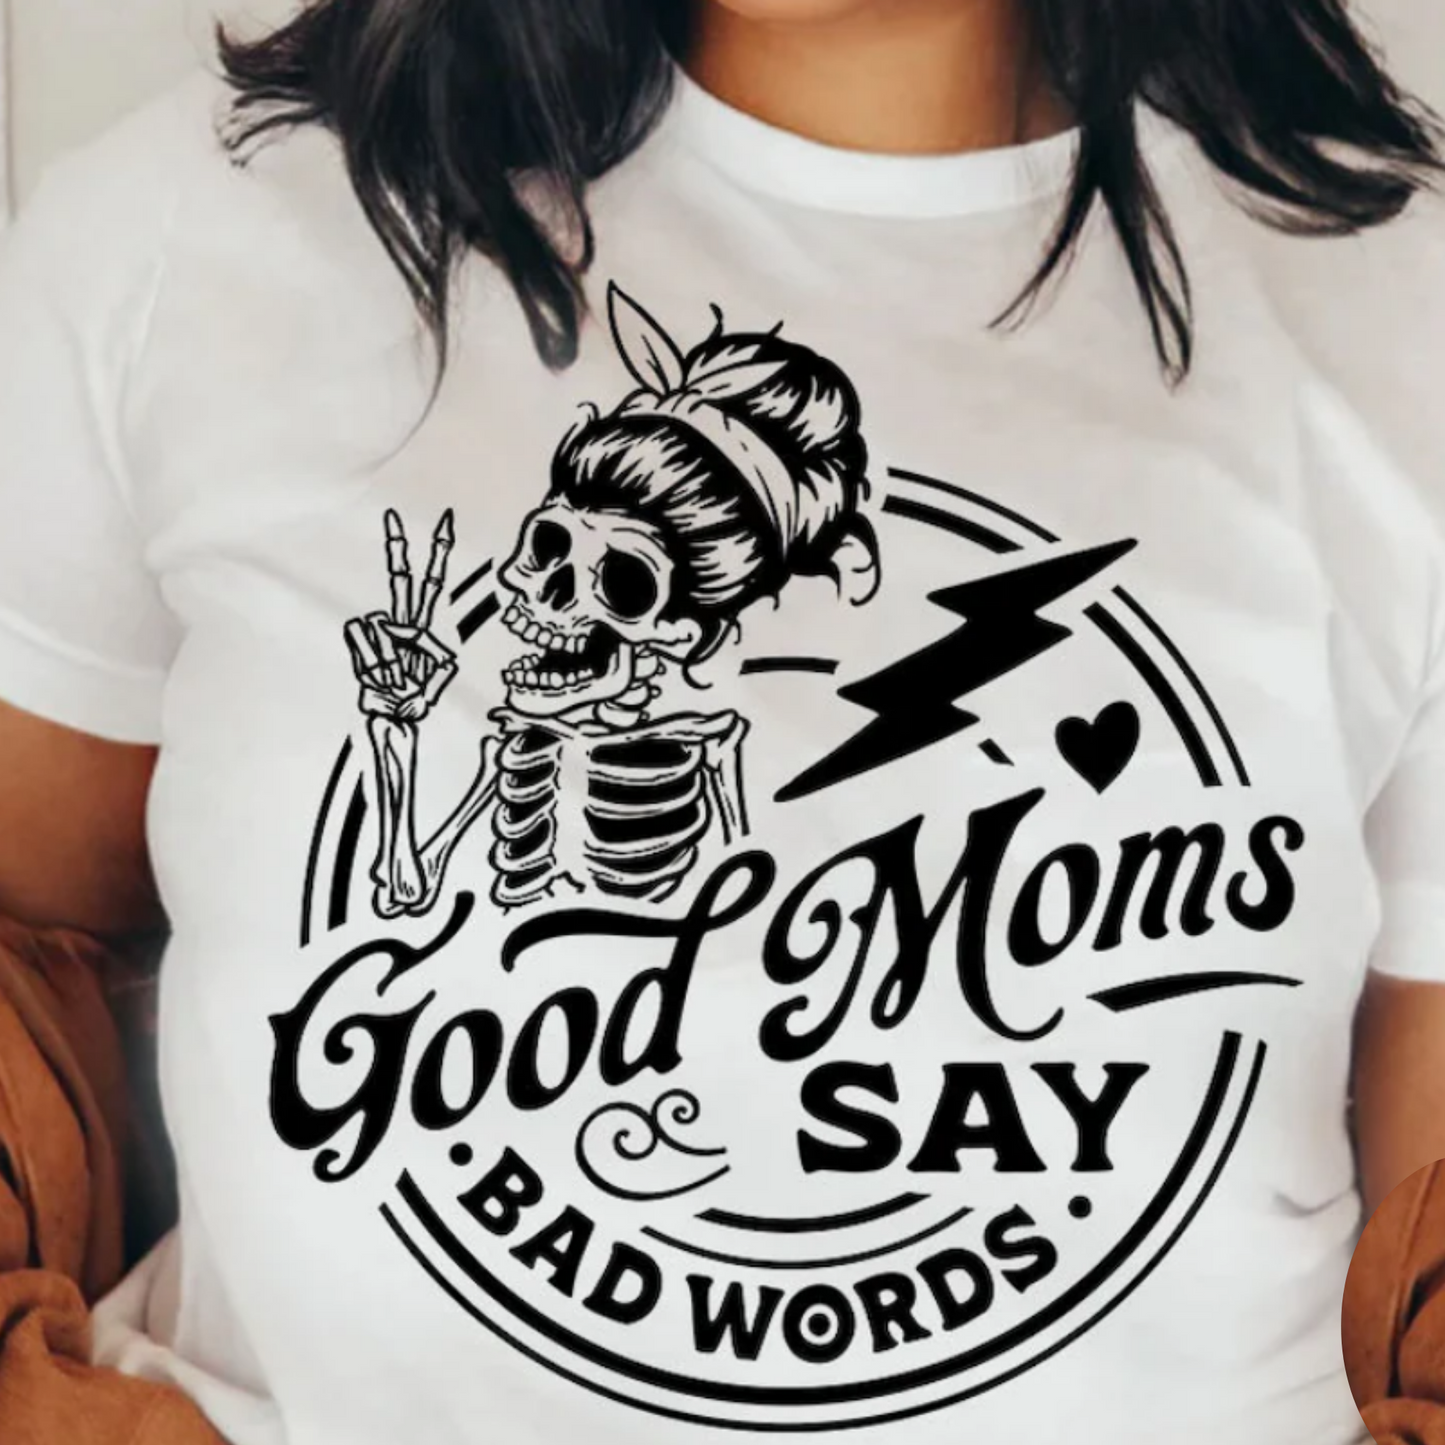 GOOD MOMS SAY BAD WORDS T-SHIRT OR PICK FROM 200 COLOR & STYLE OPTIONS! - TAT 4-7 DAYS